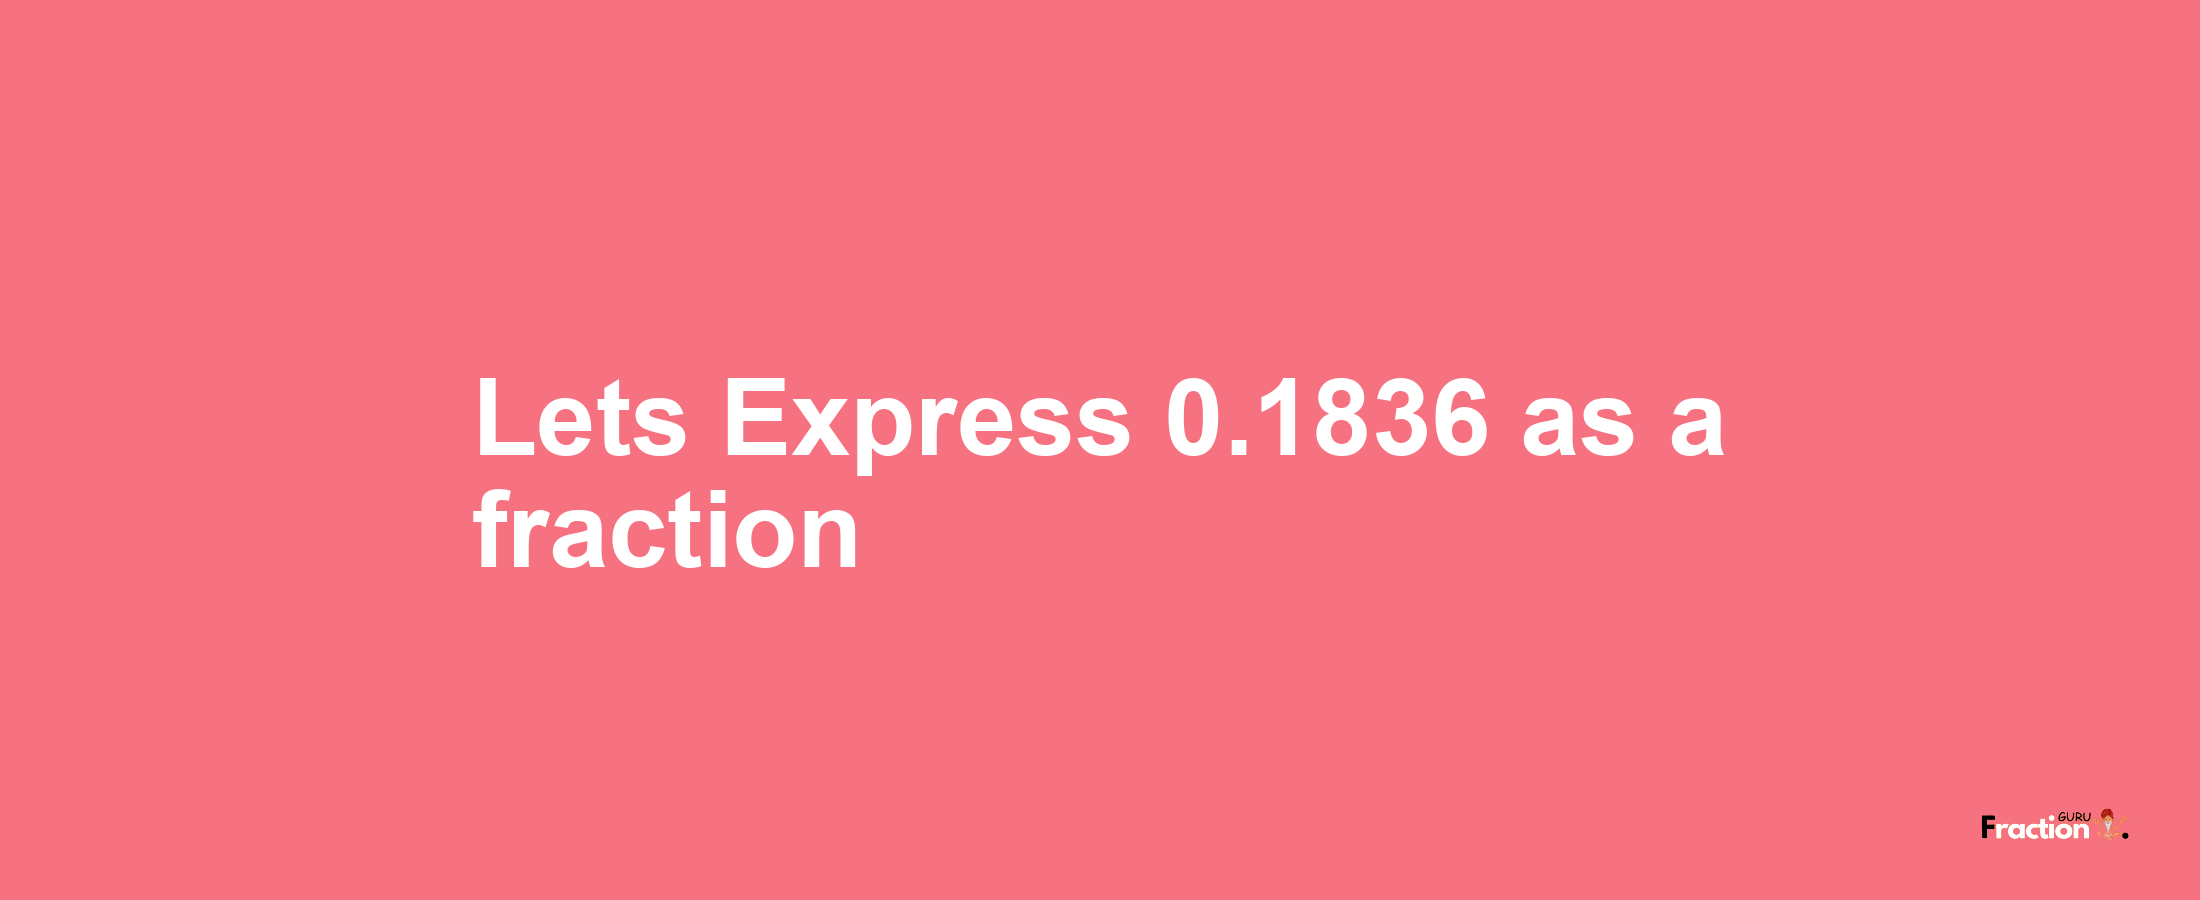 Lets Express 0.1836 as afraction